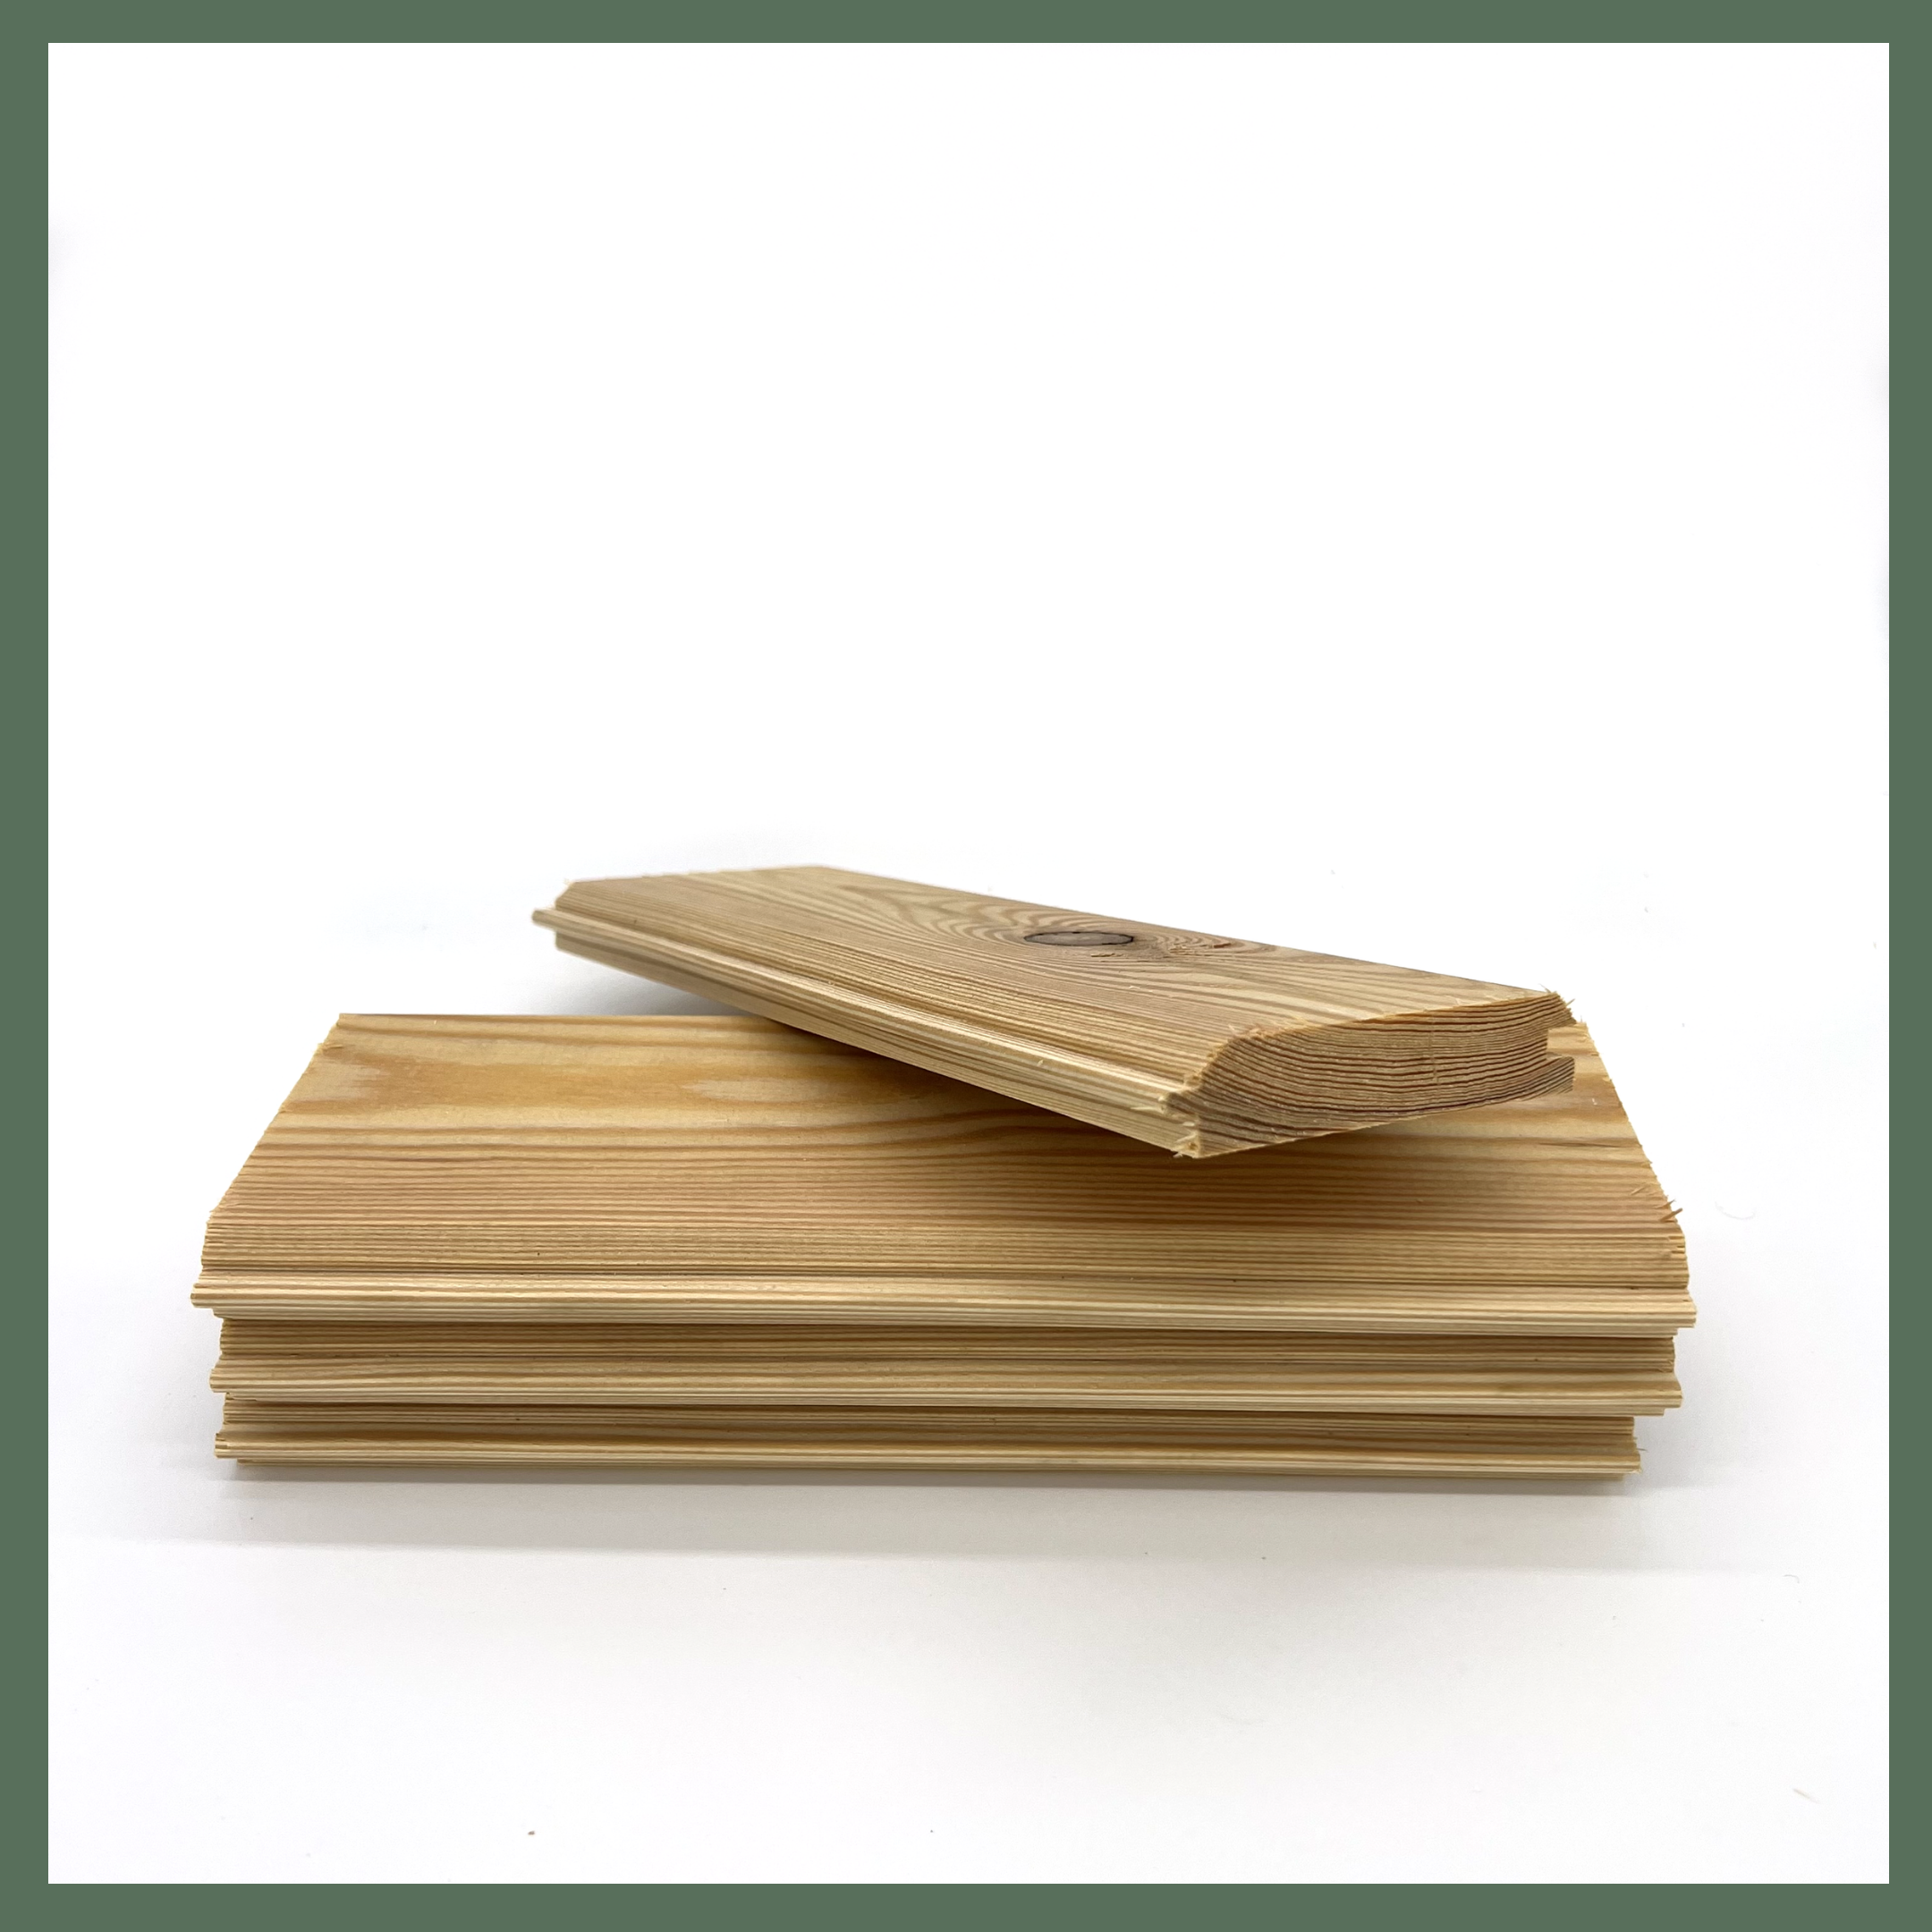 Siberian Larch T&G Cladding Fast Deliveries! Sample / V-Groove – J F Timber